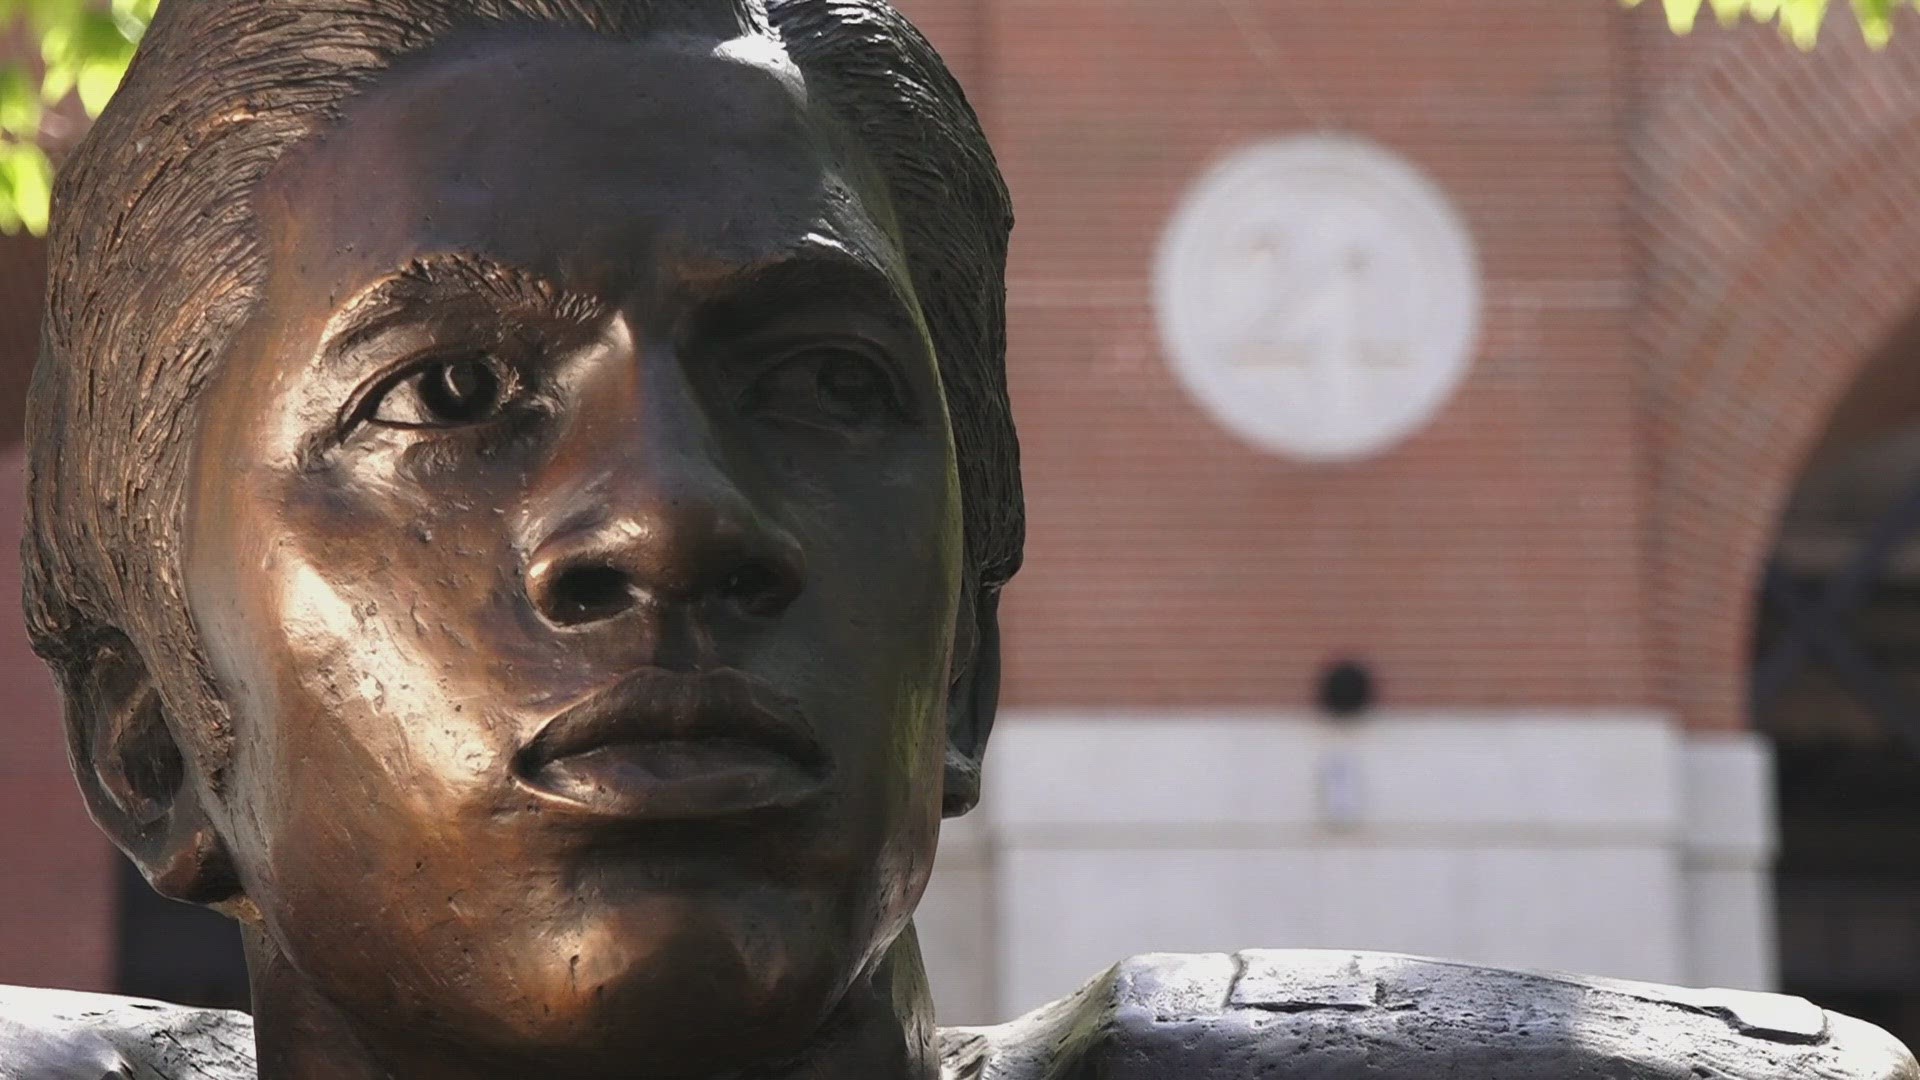 "The Artful Dodger" was Tennessee's first Black quarterback. He leaves behind a legacy of triumph.